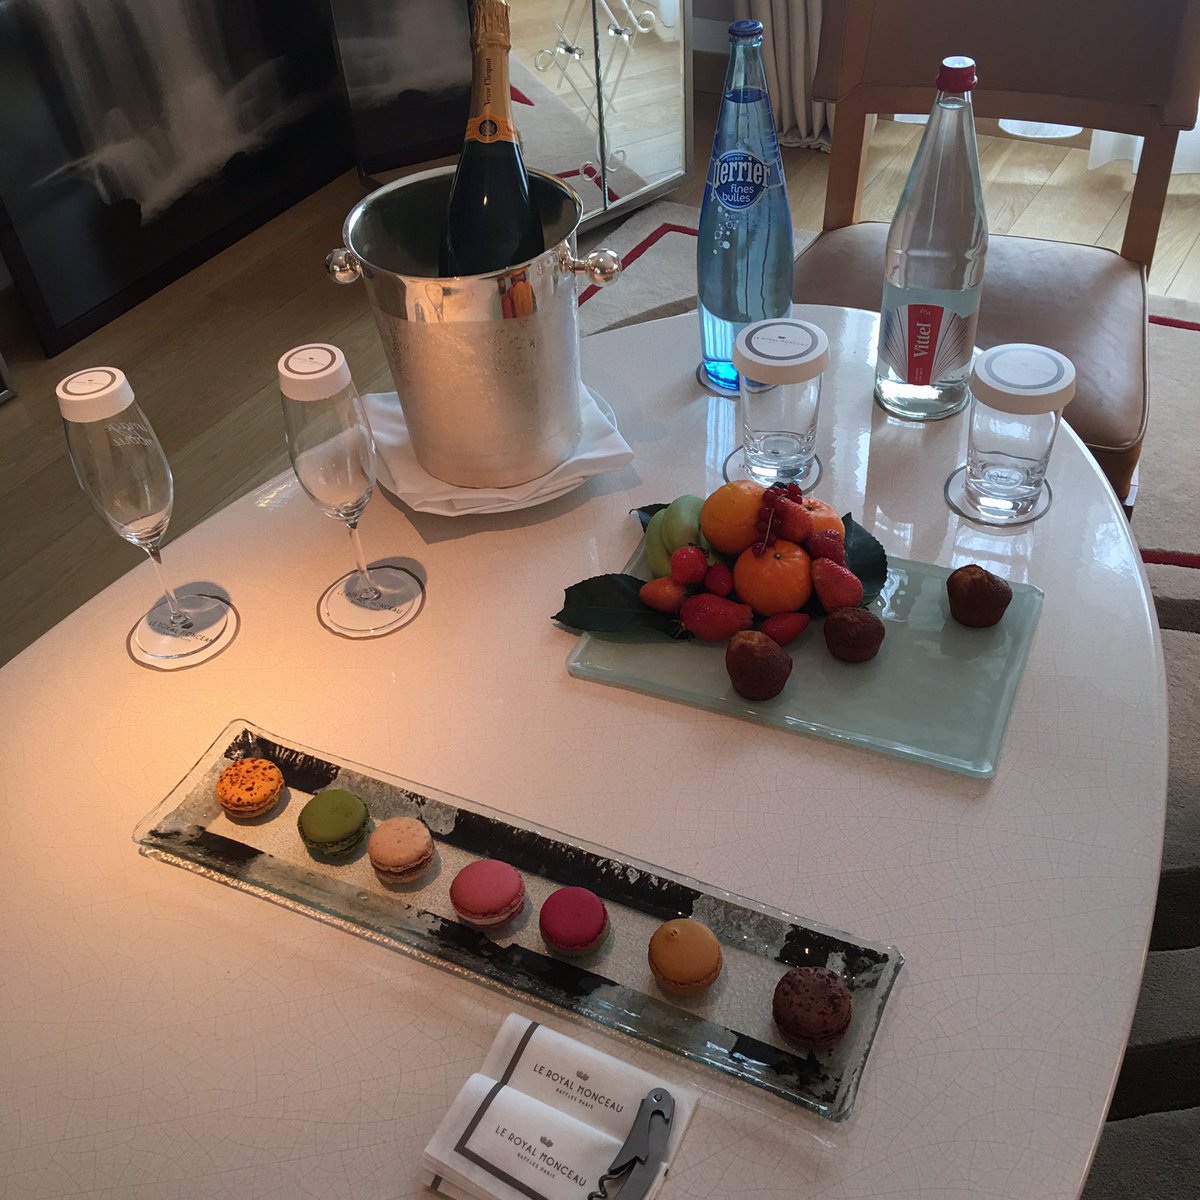 Always get the warmest welcome back to my suite @LeRoyalMonceau Mmmmmmm!!!!#RG16 https://t.co/oZ60aCkmhy